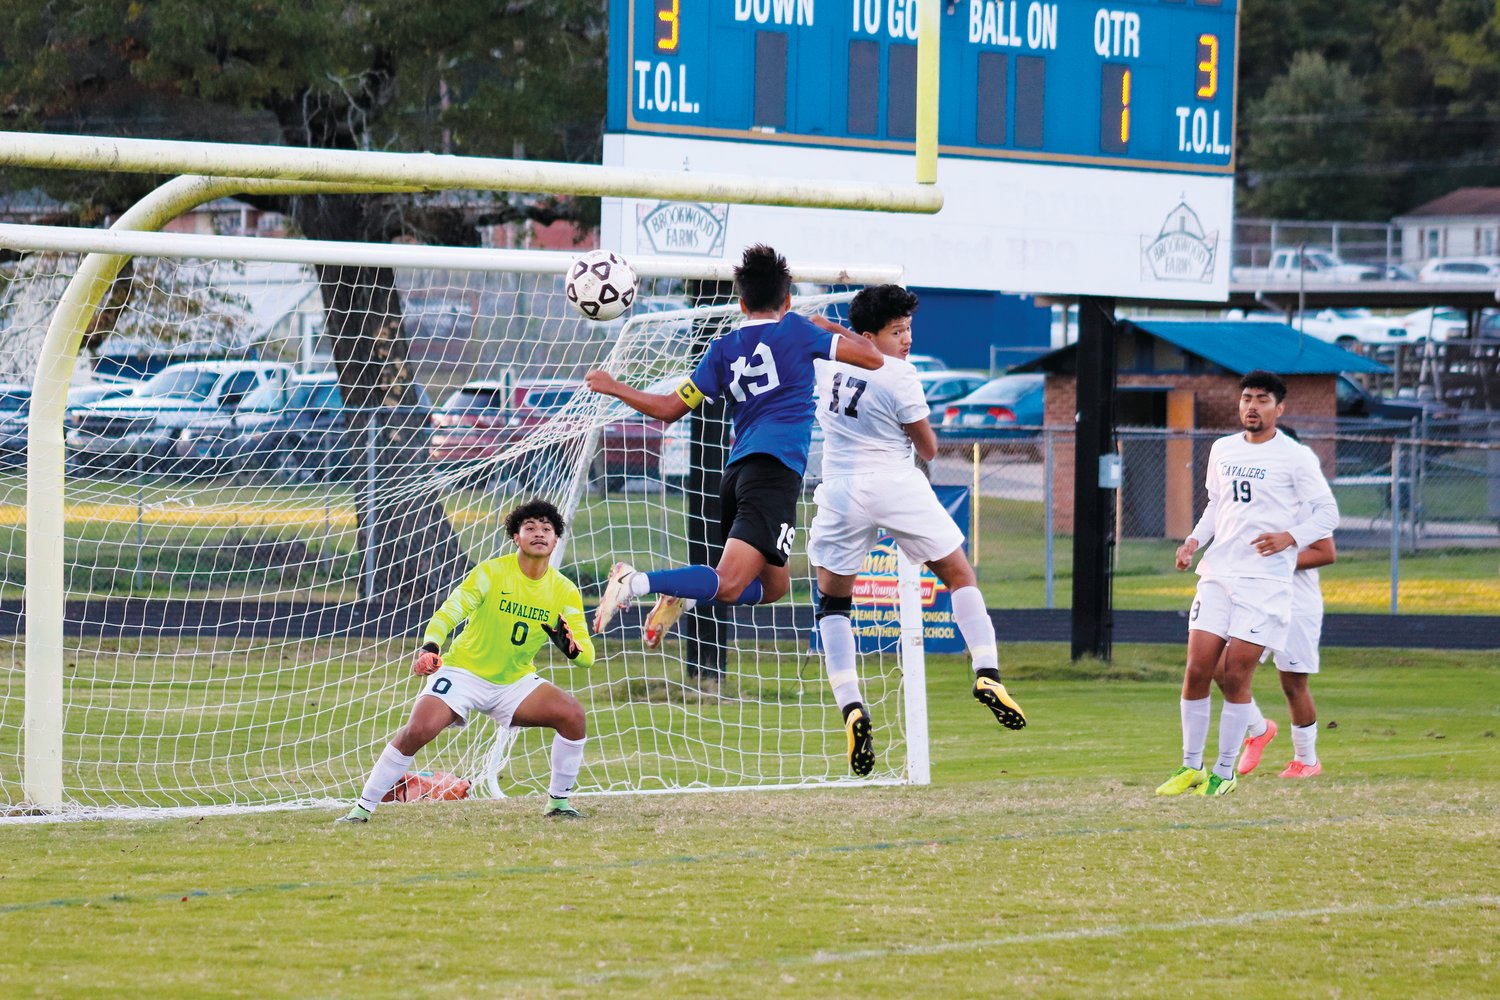 Jordan-Matthews senior Alexis Ibarra (19) attempts to knock-in a shot with a header during the Jets' 6-0 win over the Cummings Cavaliers in Siler City on Monday. With the win, unbeaten J-M improves to 15-0-1 on the season.